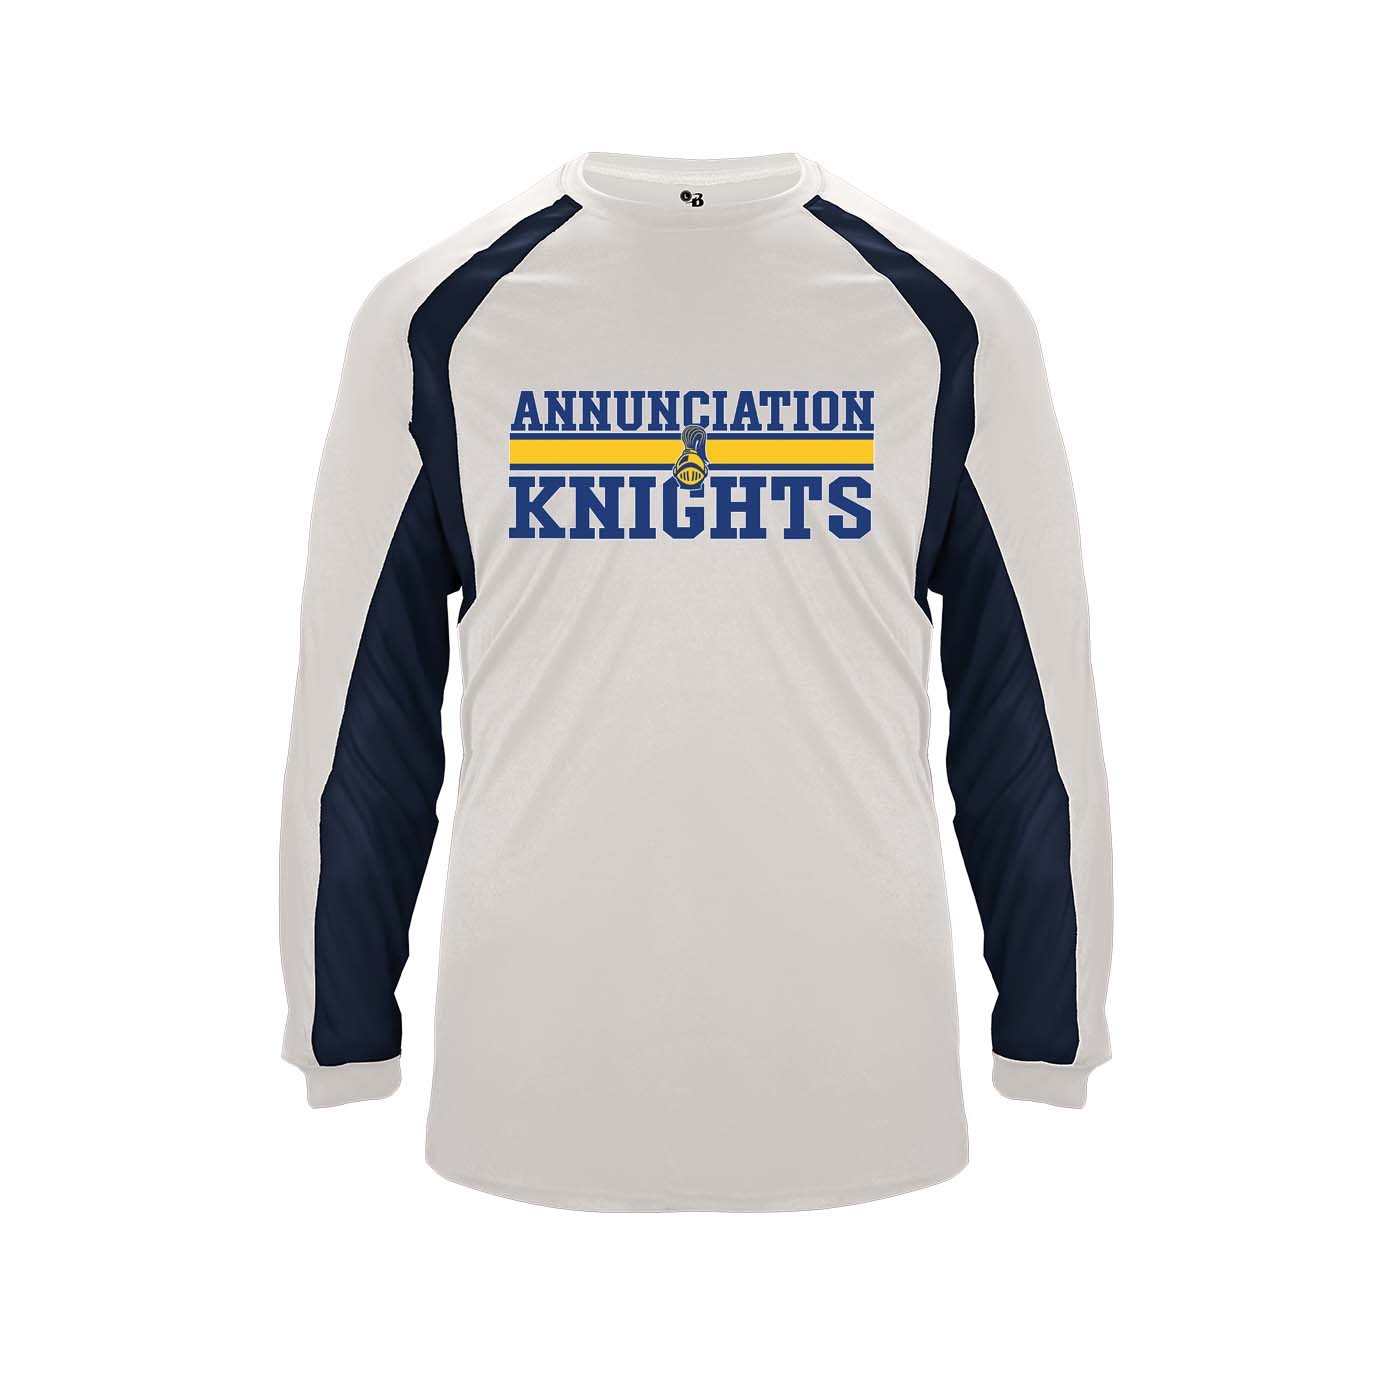 ANN Spirit Hook L/S T-Shirt w/ Annunciation Knights Logo - Please Allow 2-3 Weeks for Delivery